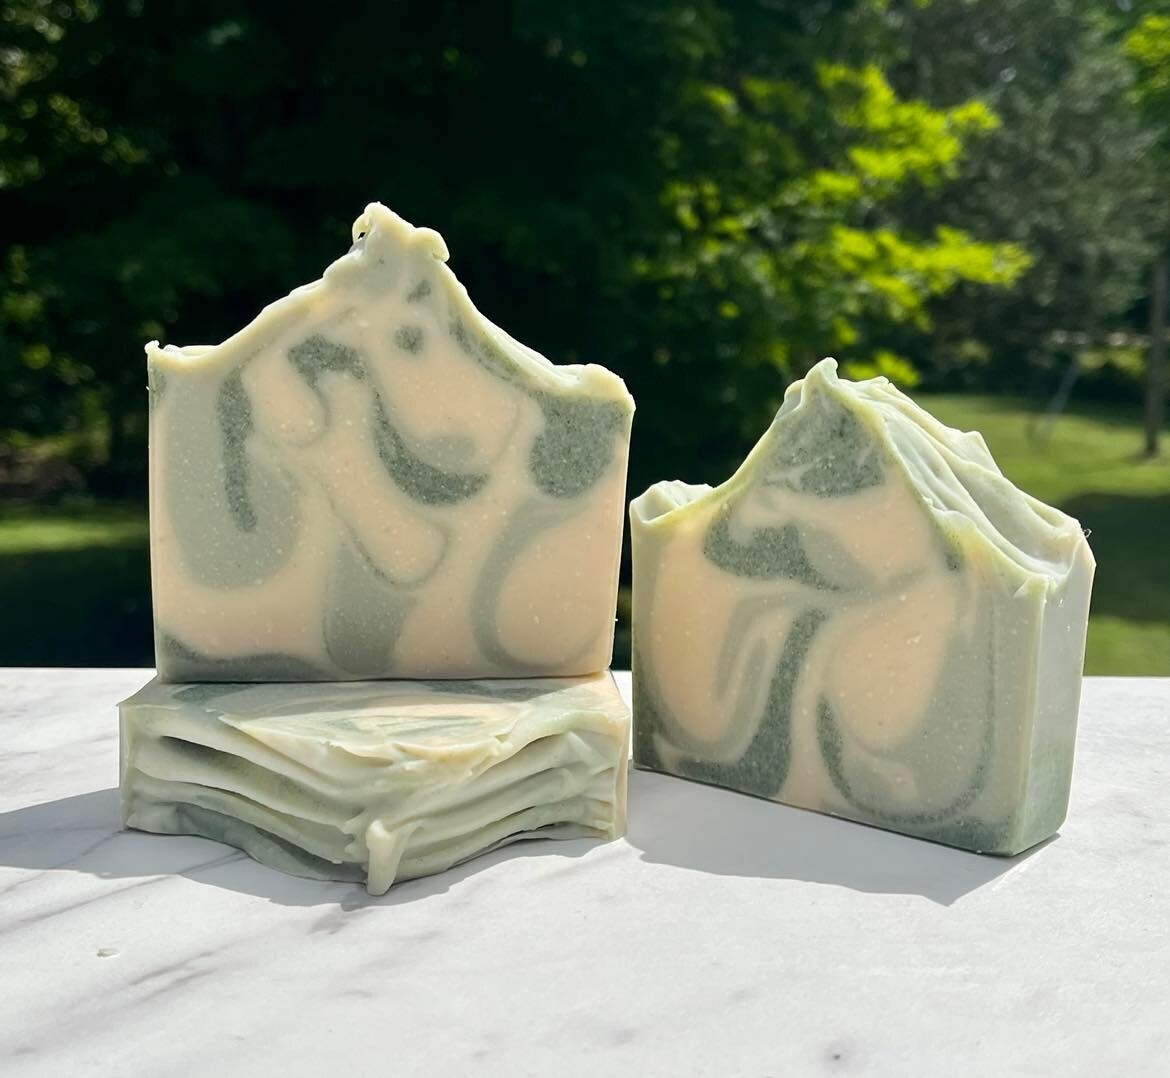 Rosemary + Mint Goat Milk Soap - All Natural